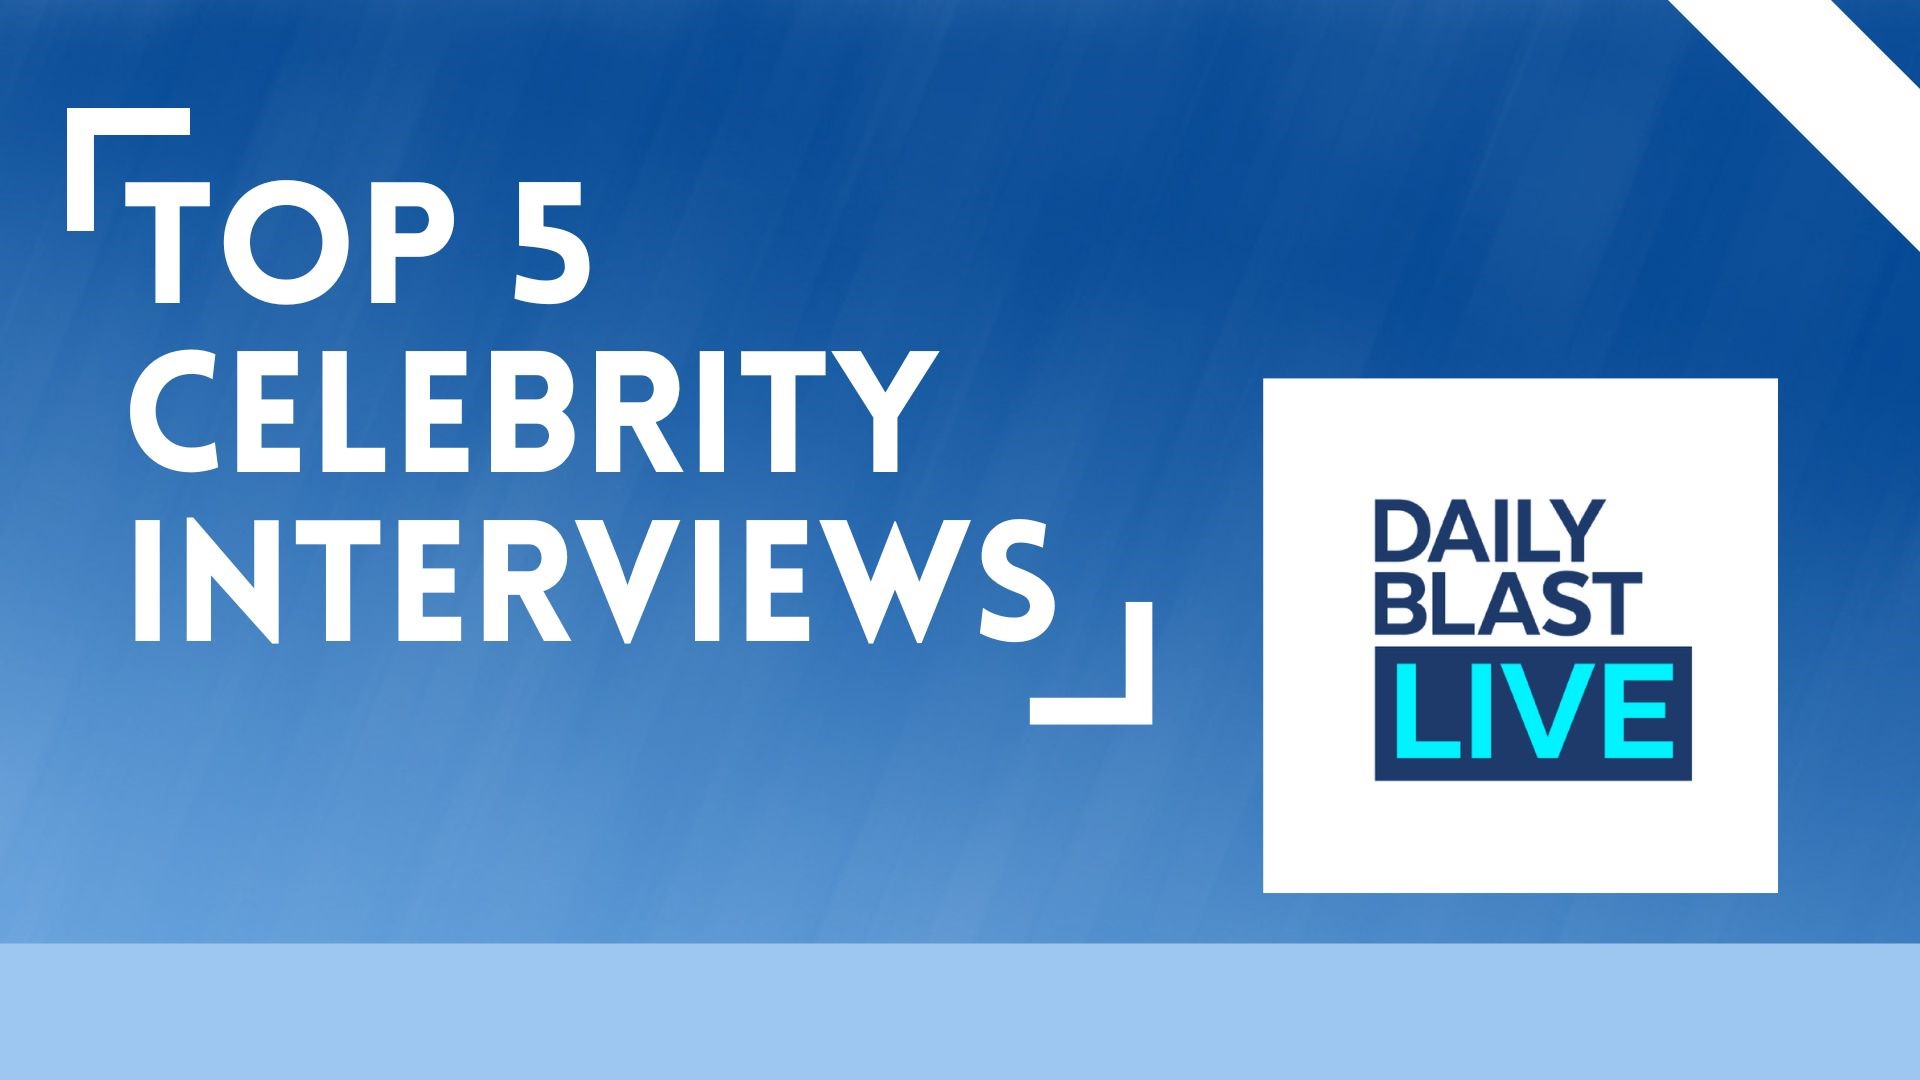 A look at some of the top celebrity interviews on Daily Blast Live, from Matthew McConaughey to Carol Burnett